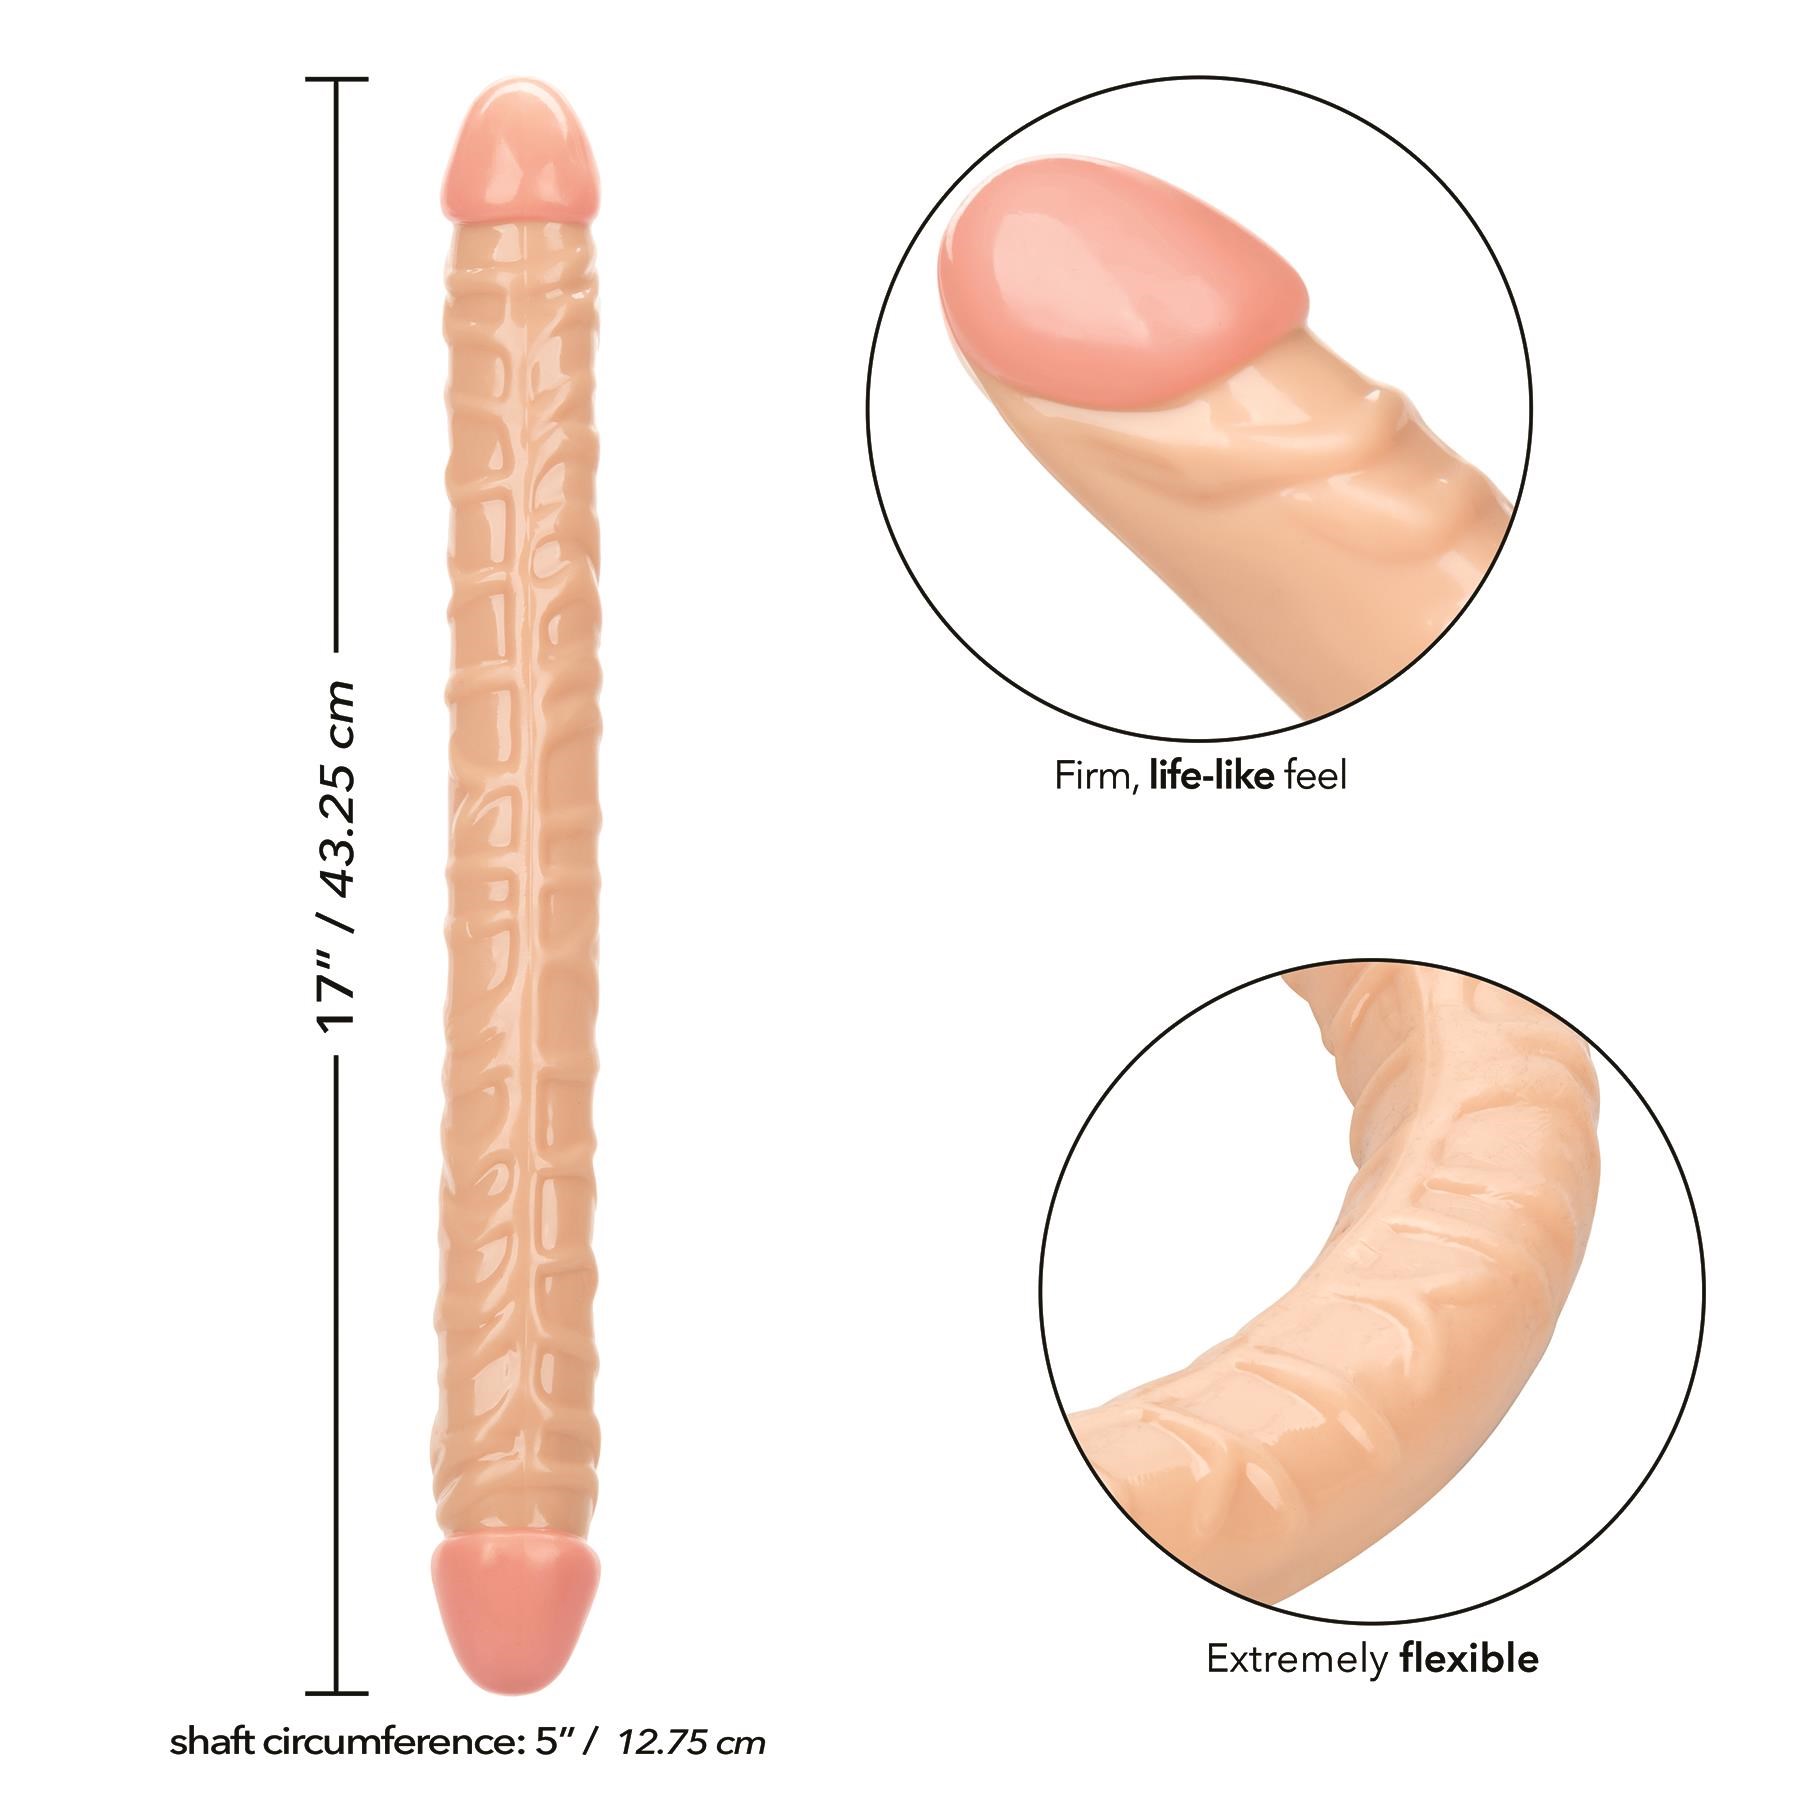 Size Queen 17 Inch Double Dong - Dimensions